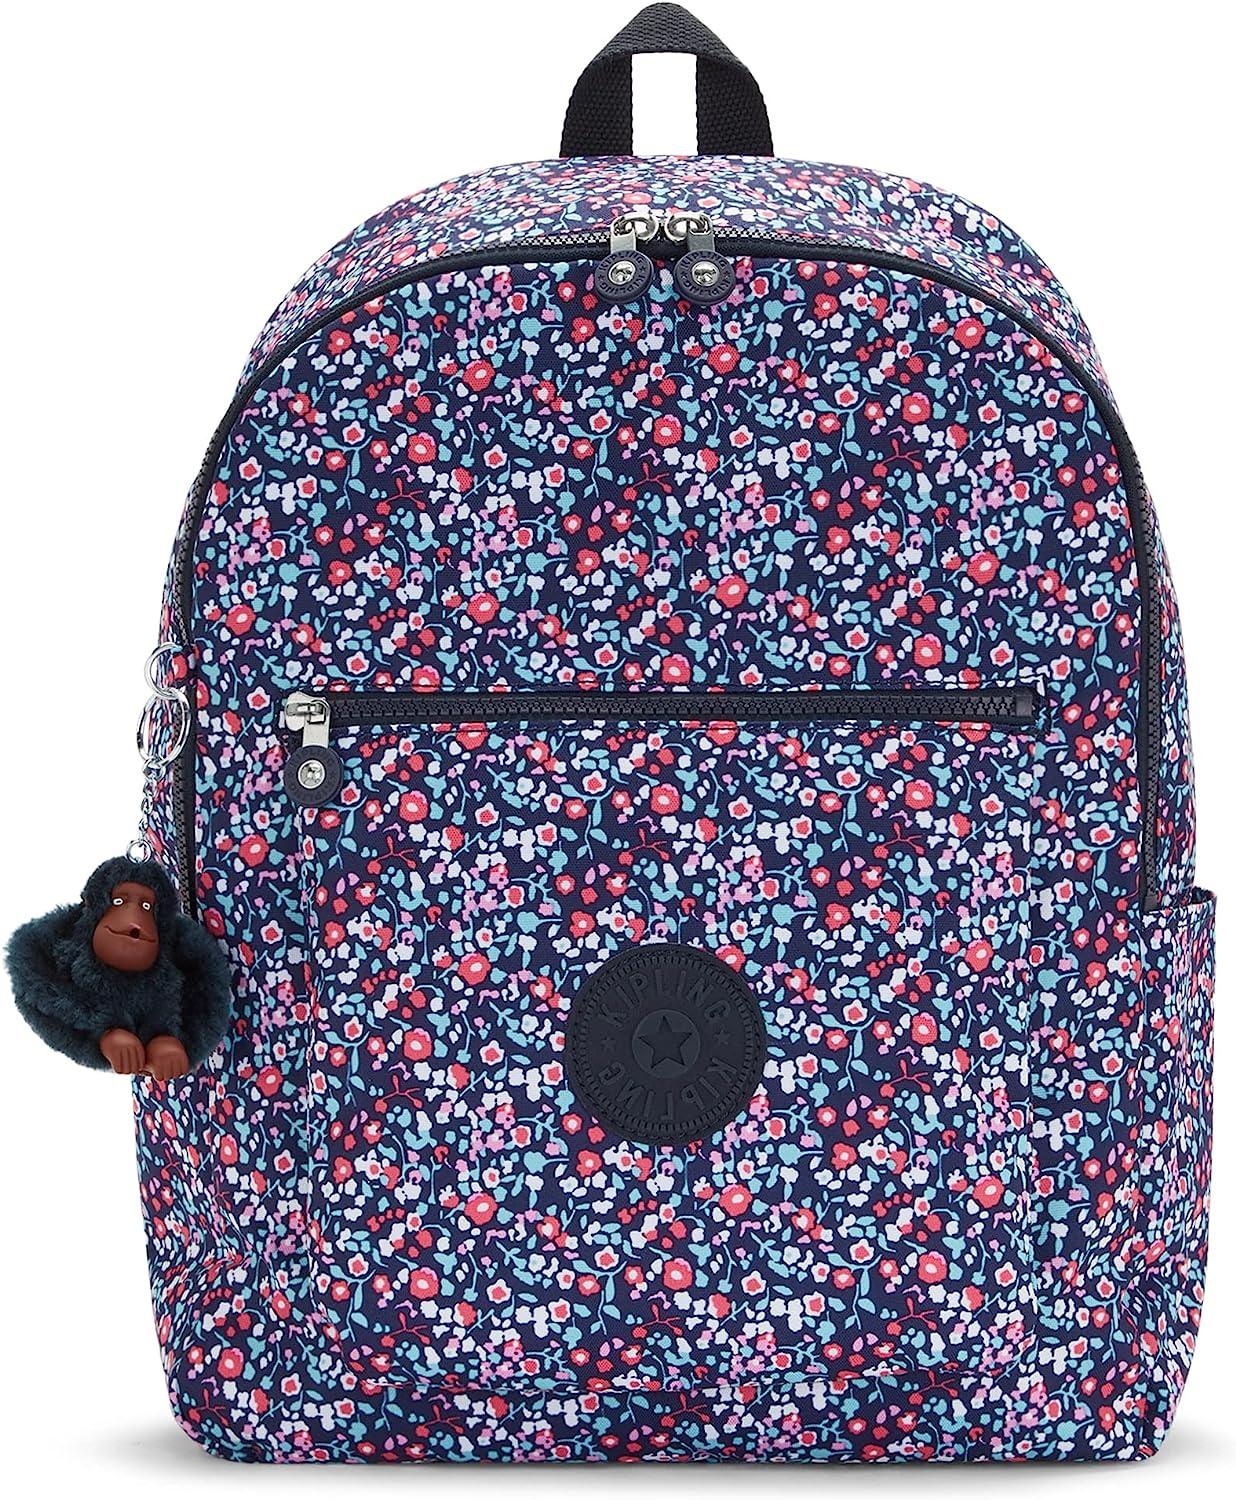 Women's Chuwy Backpack - Voyage Luggage